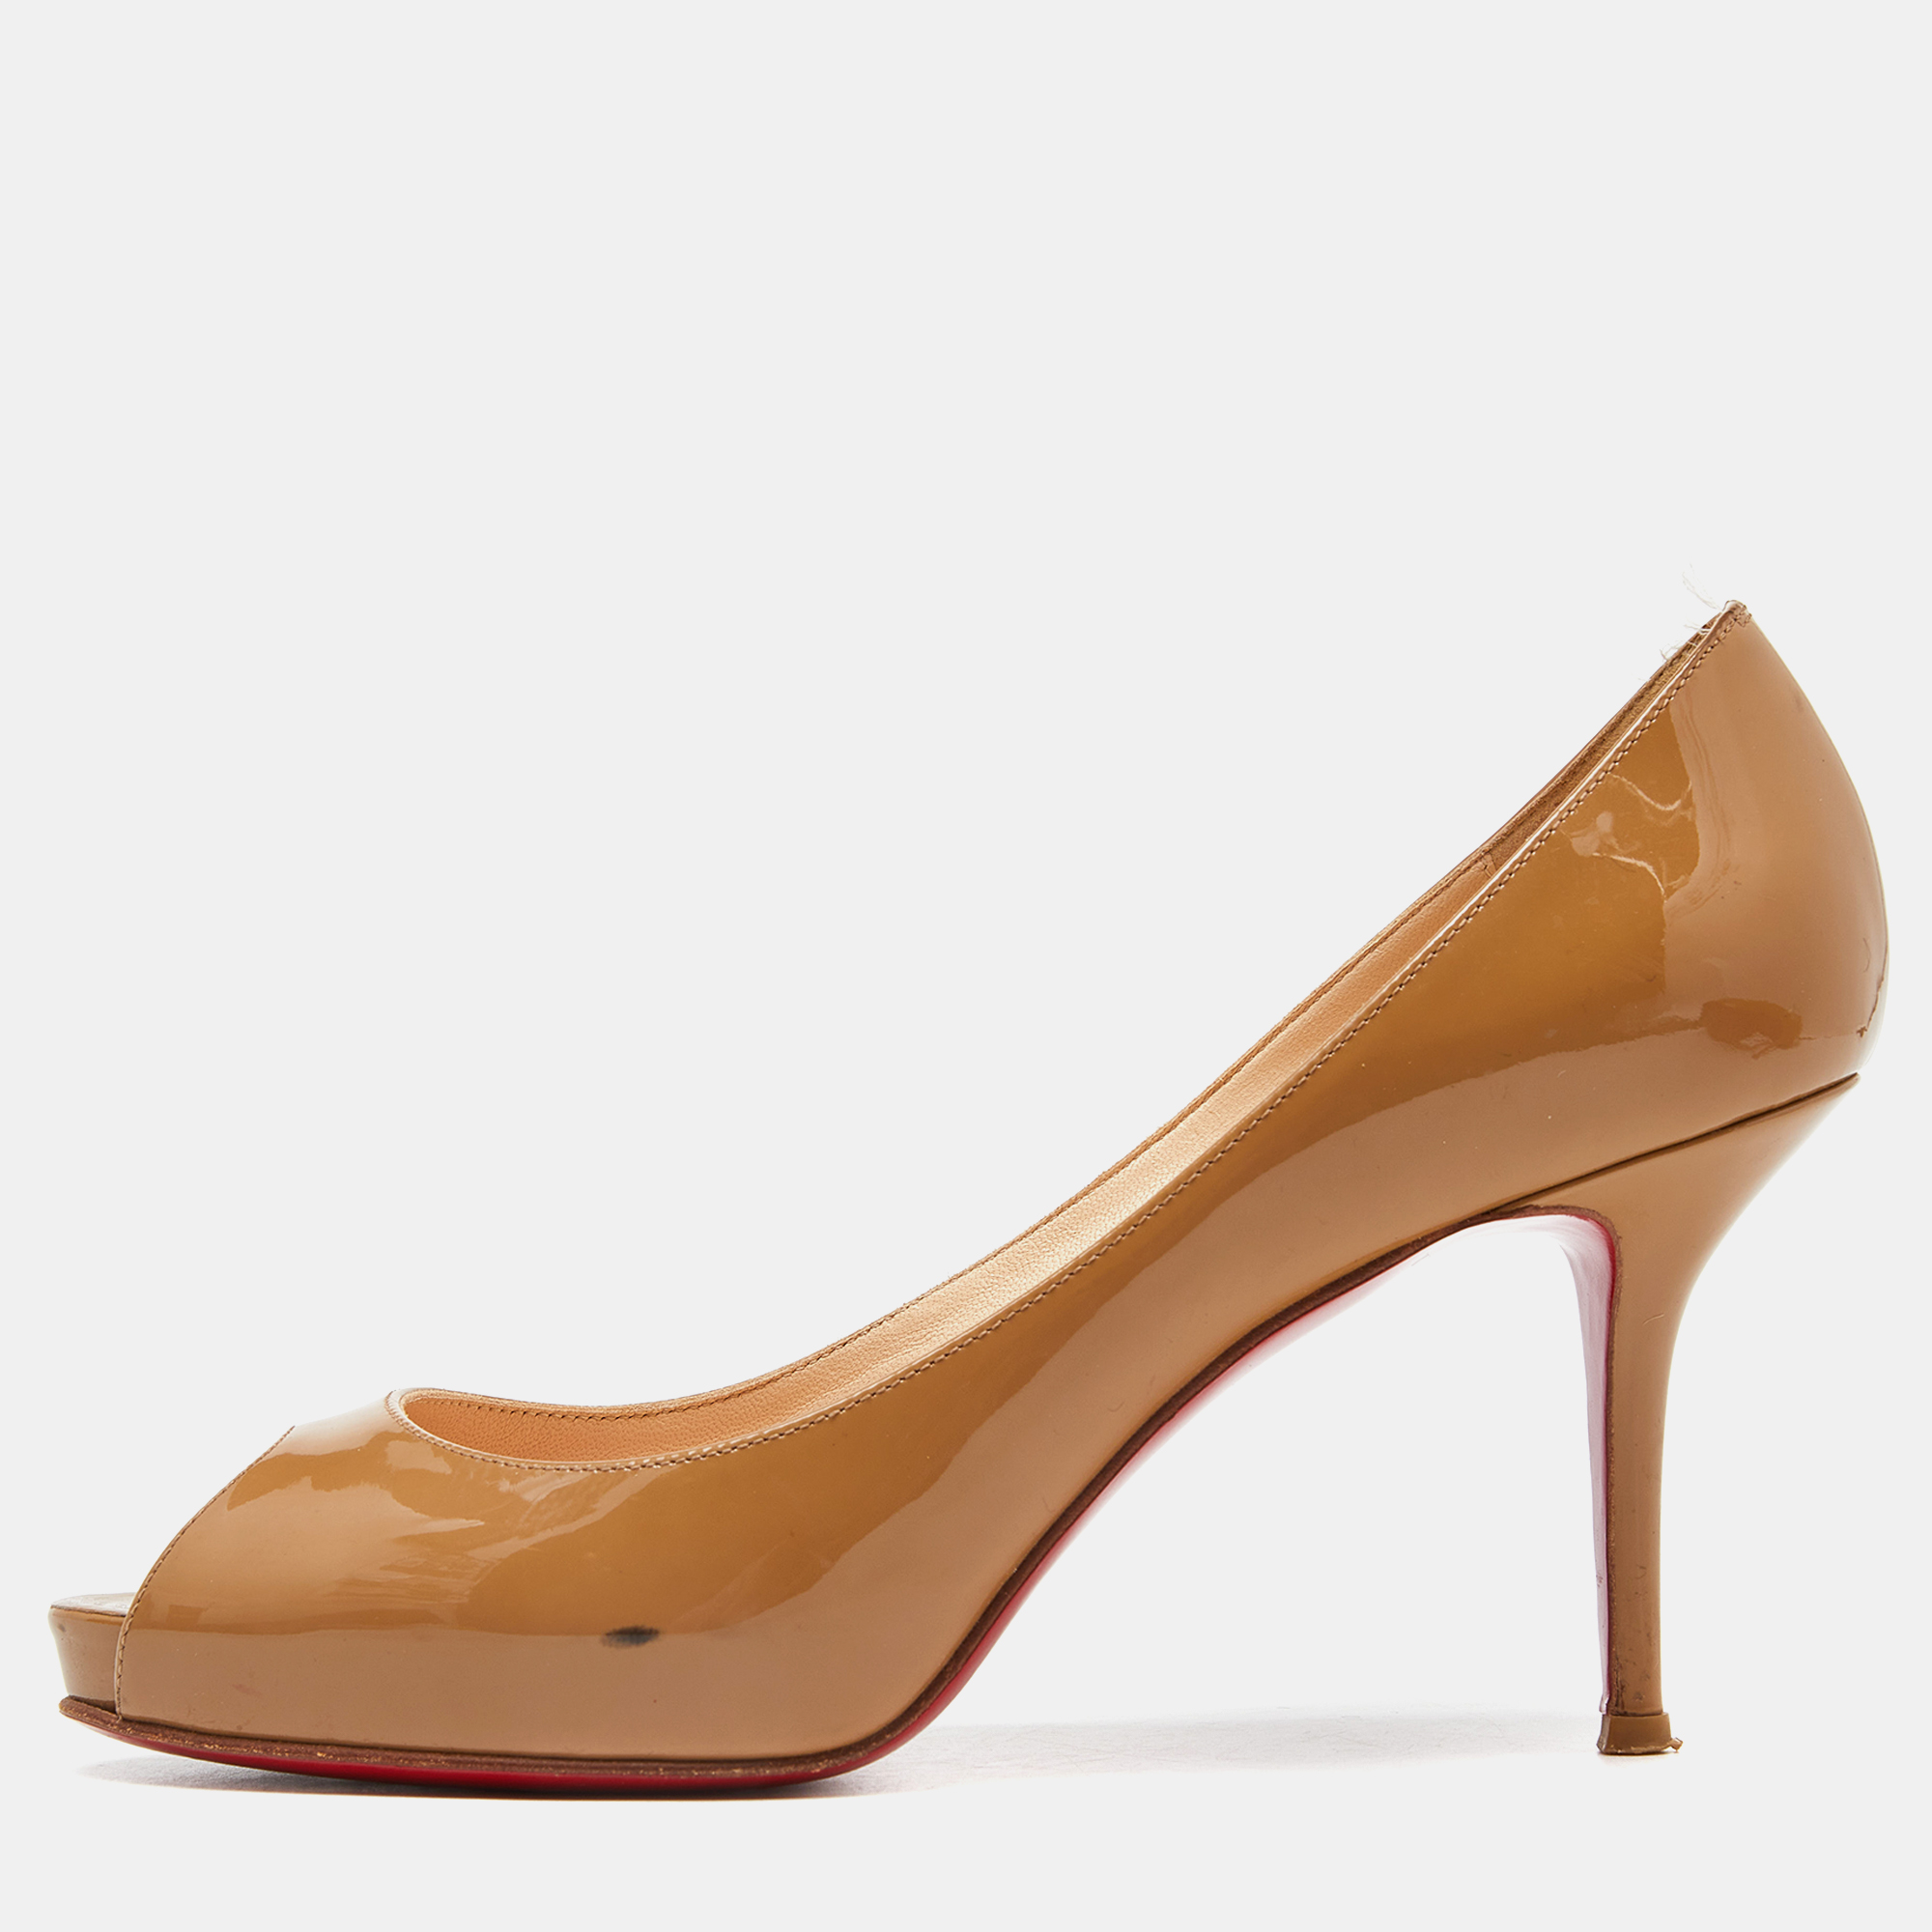 Christian louboutin beige patent leather very prive pumps size 38